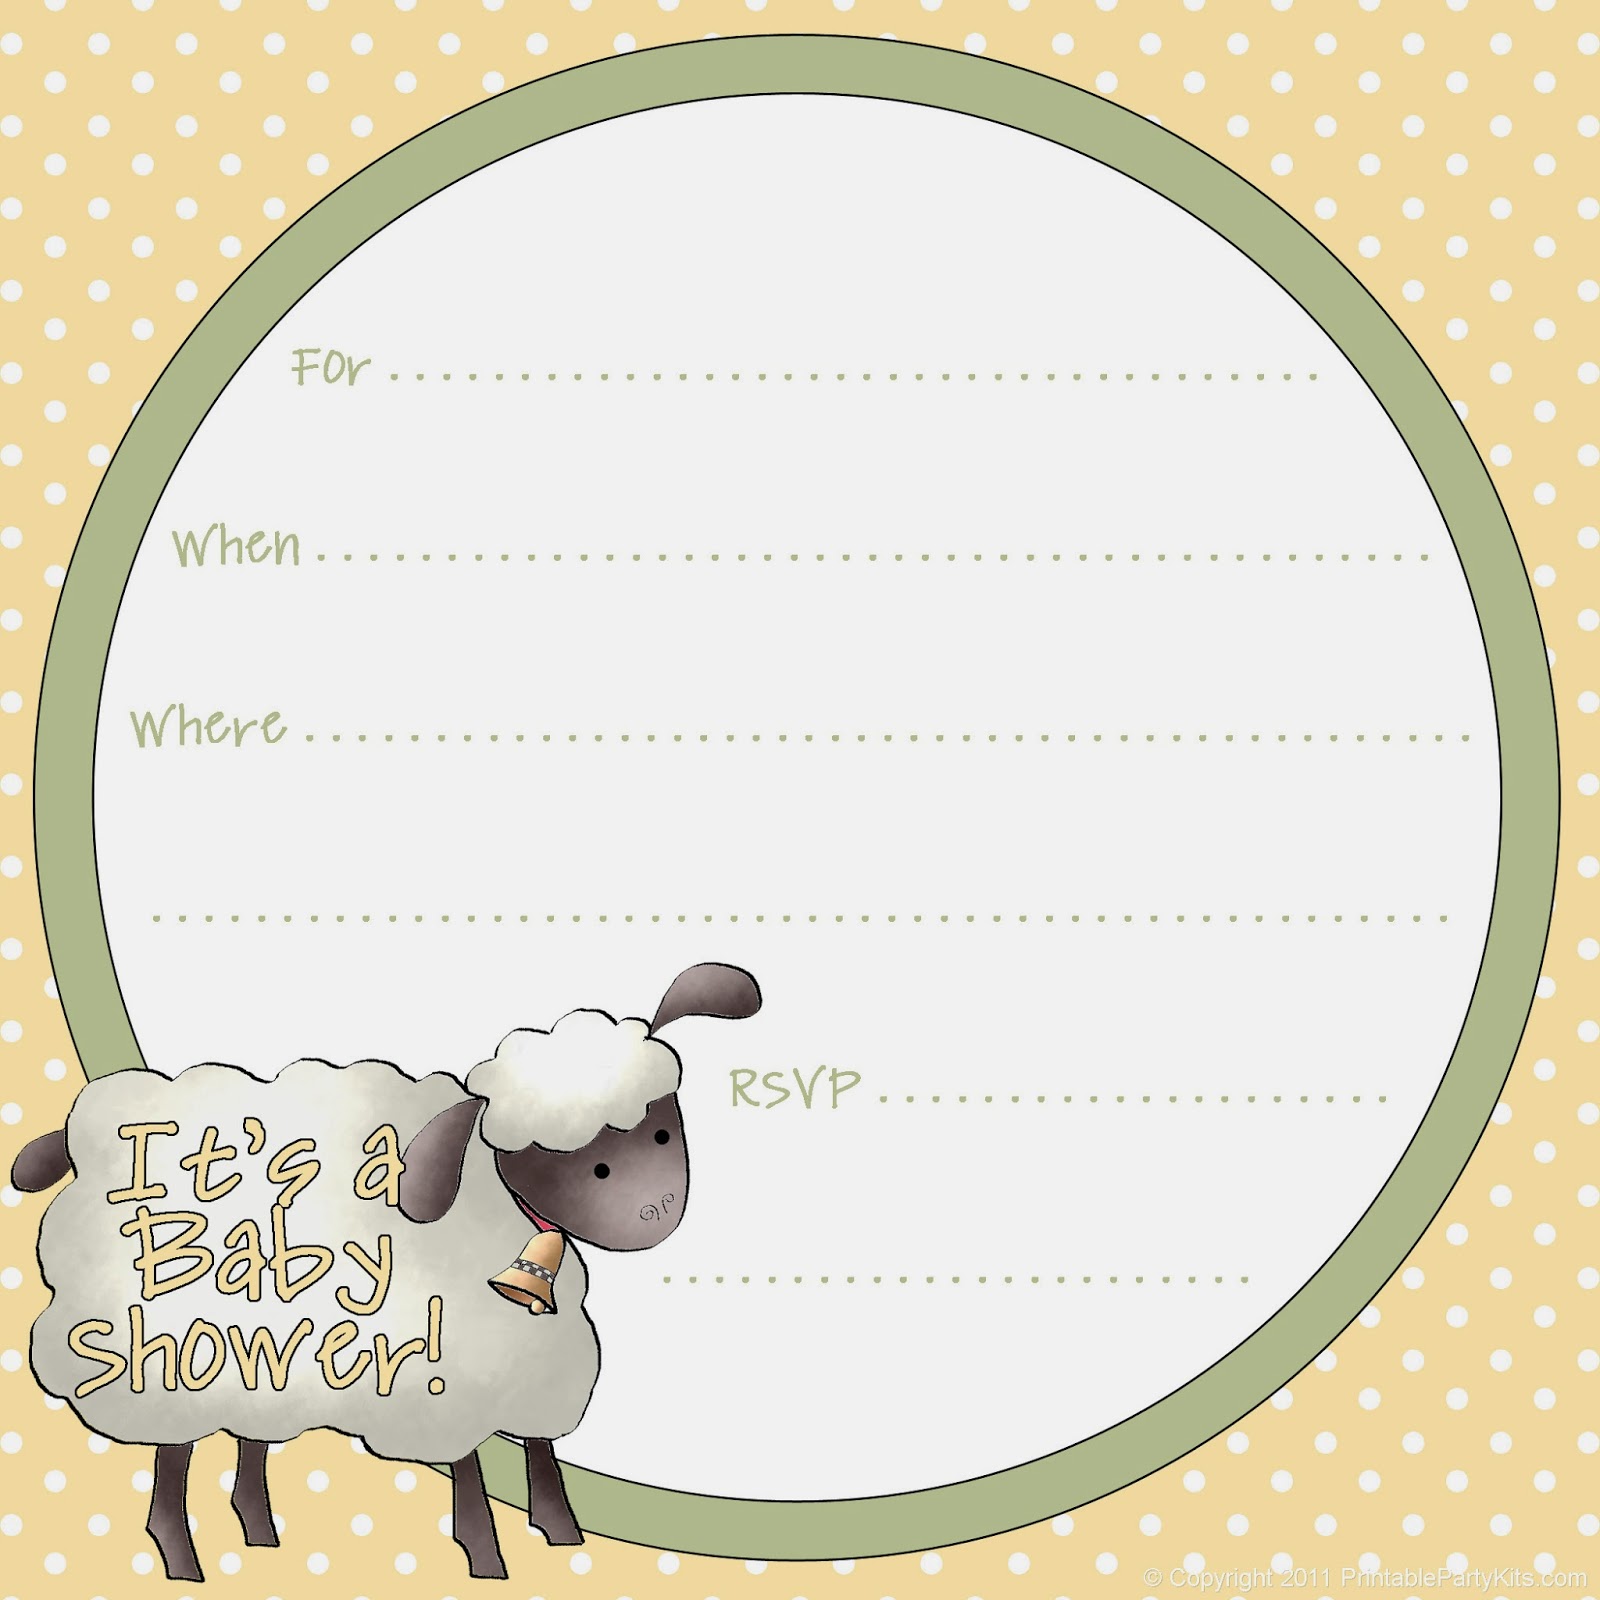 Animals for Baby Shower: Free Printable Kit.